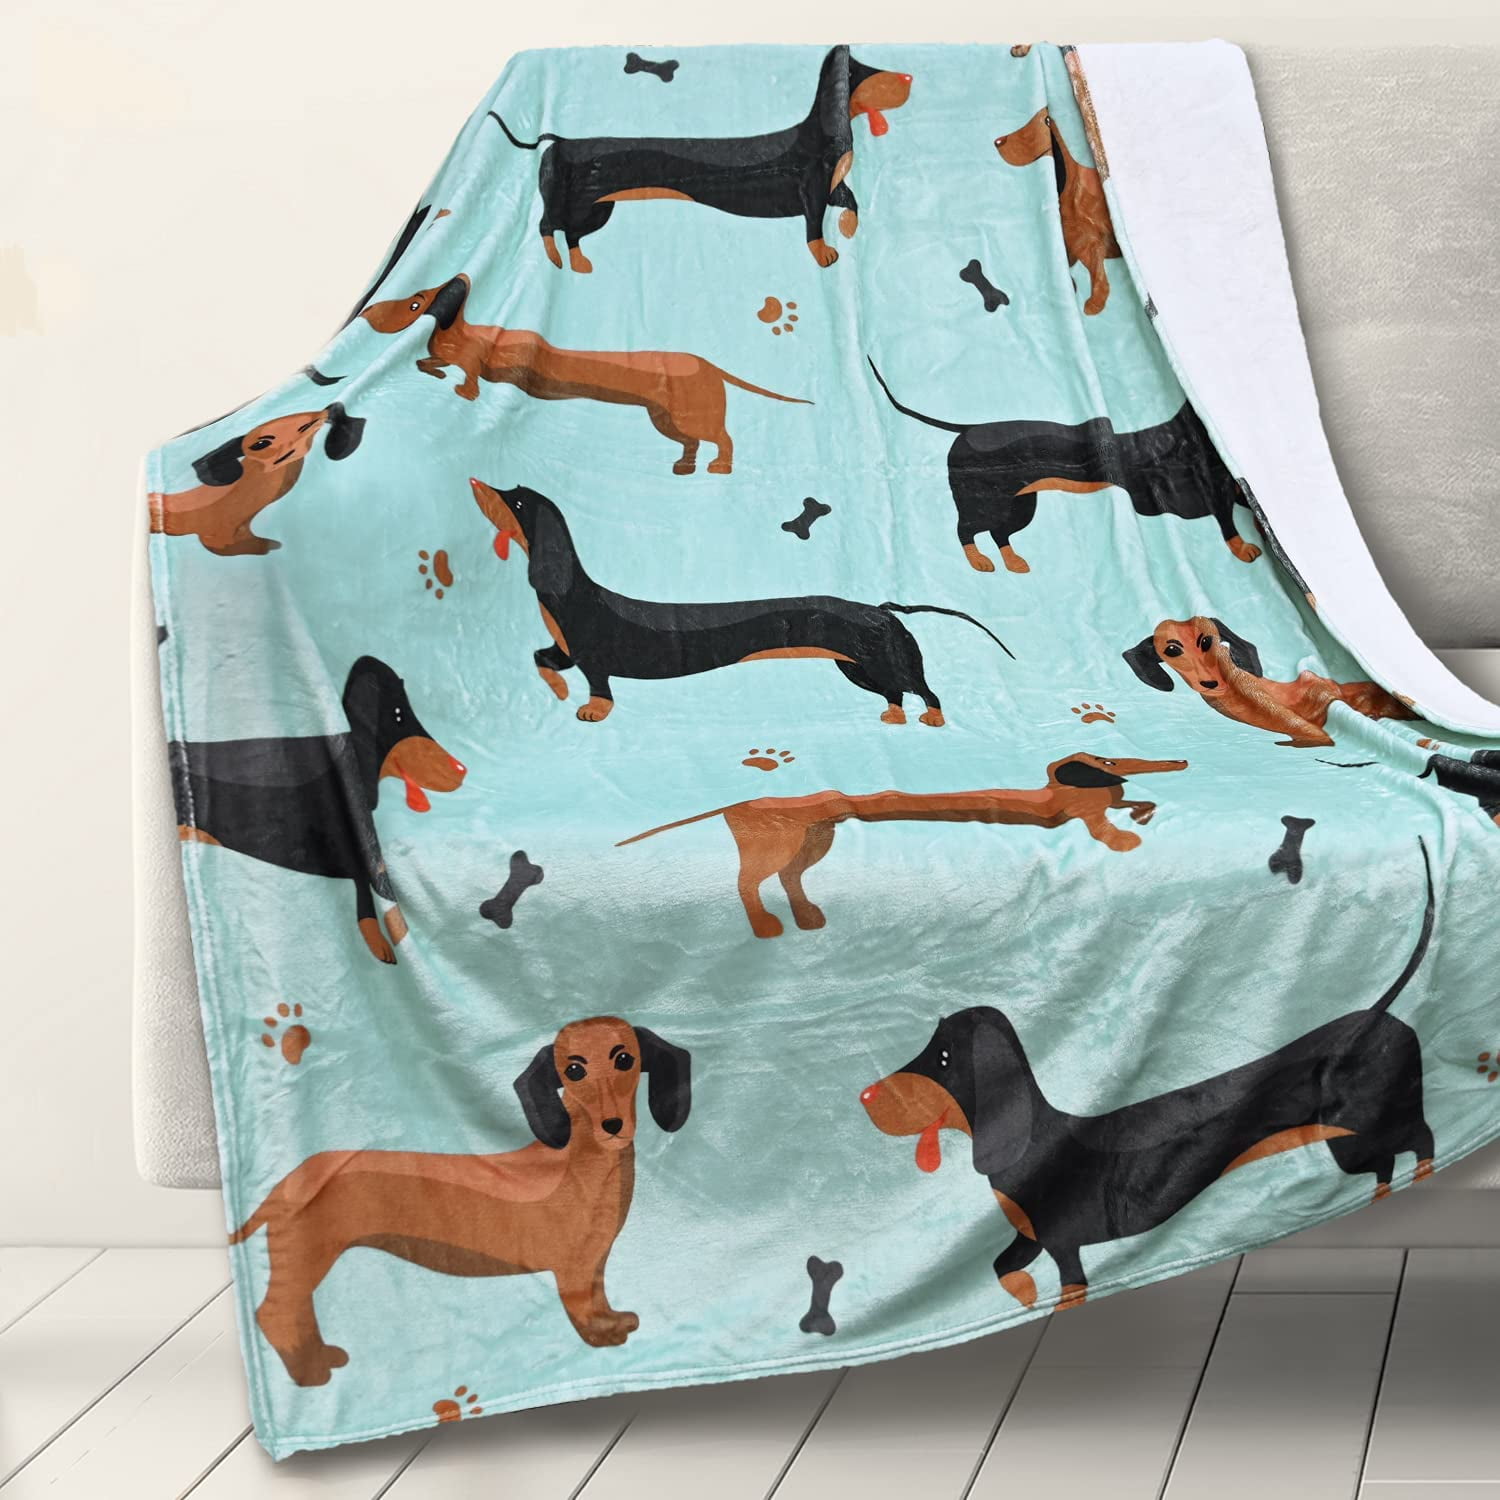 Details about   Dachshund Floral Blanket Coral Fleece Blankets All Season Washable Girl Bed Sofa 